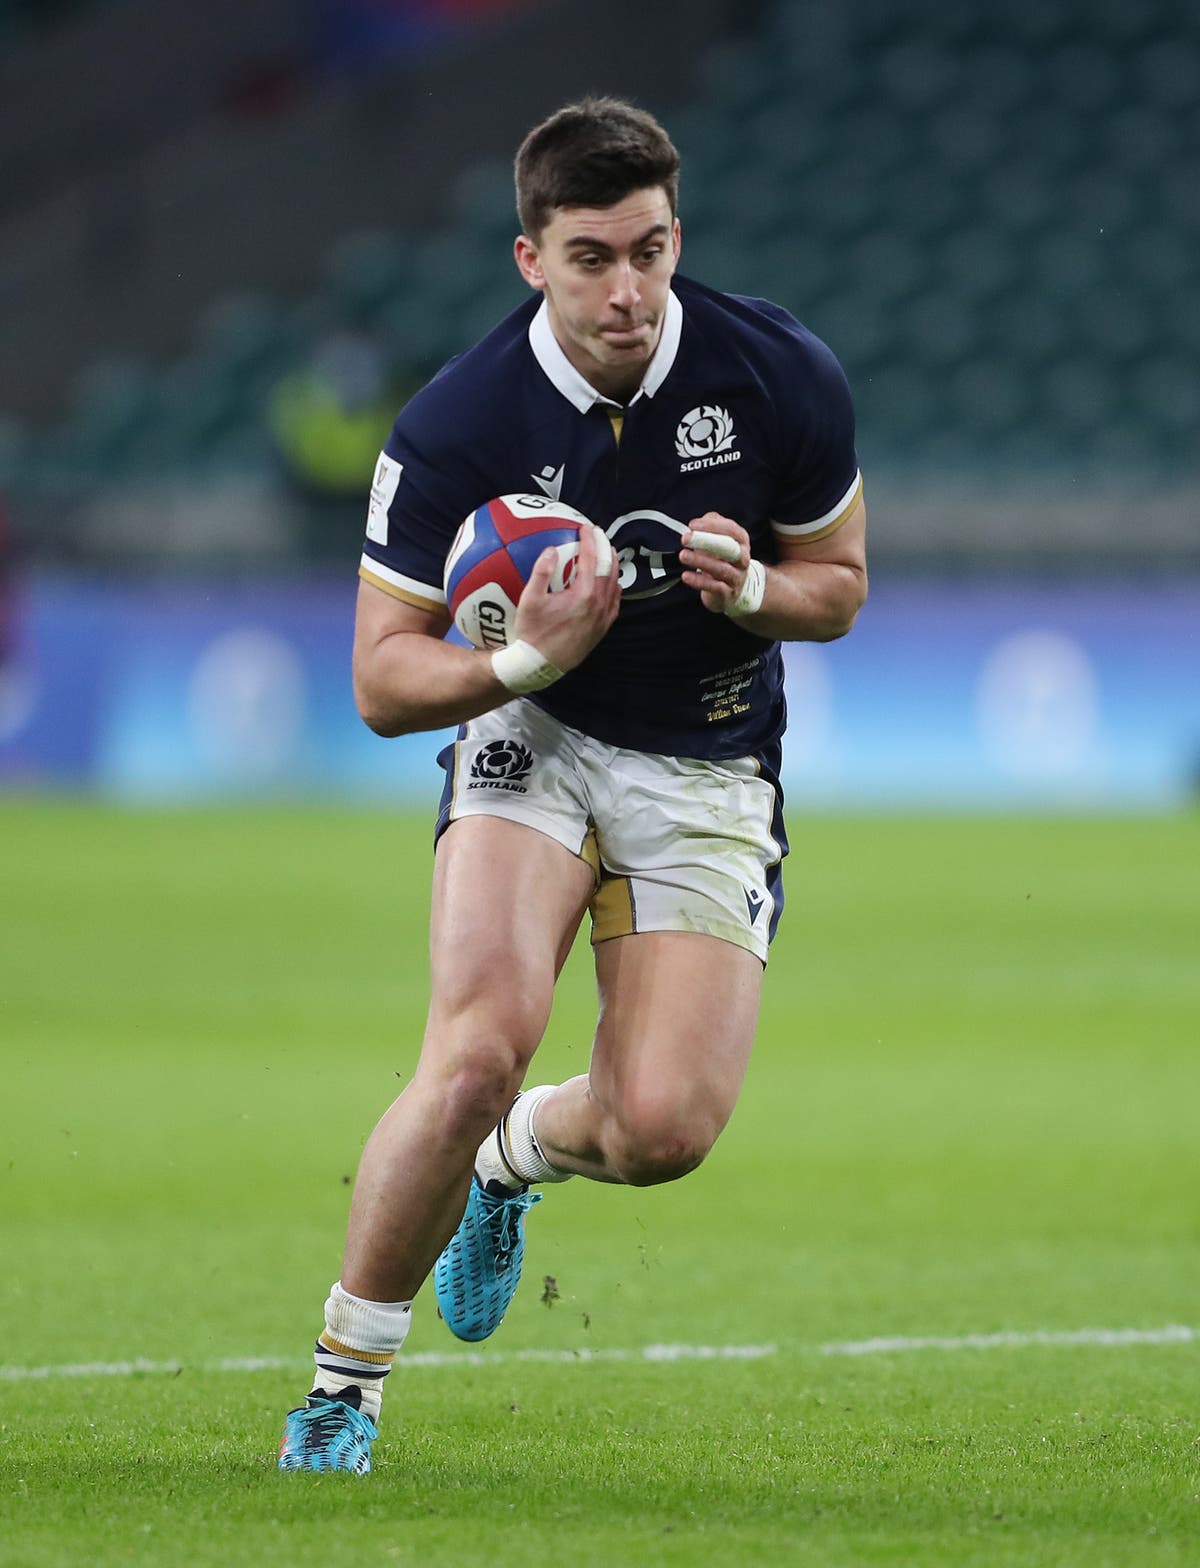 Scotland and Bath centre Cameron Redpath faces lengthy injury absence